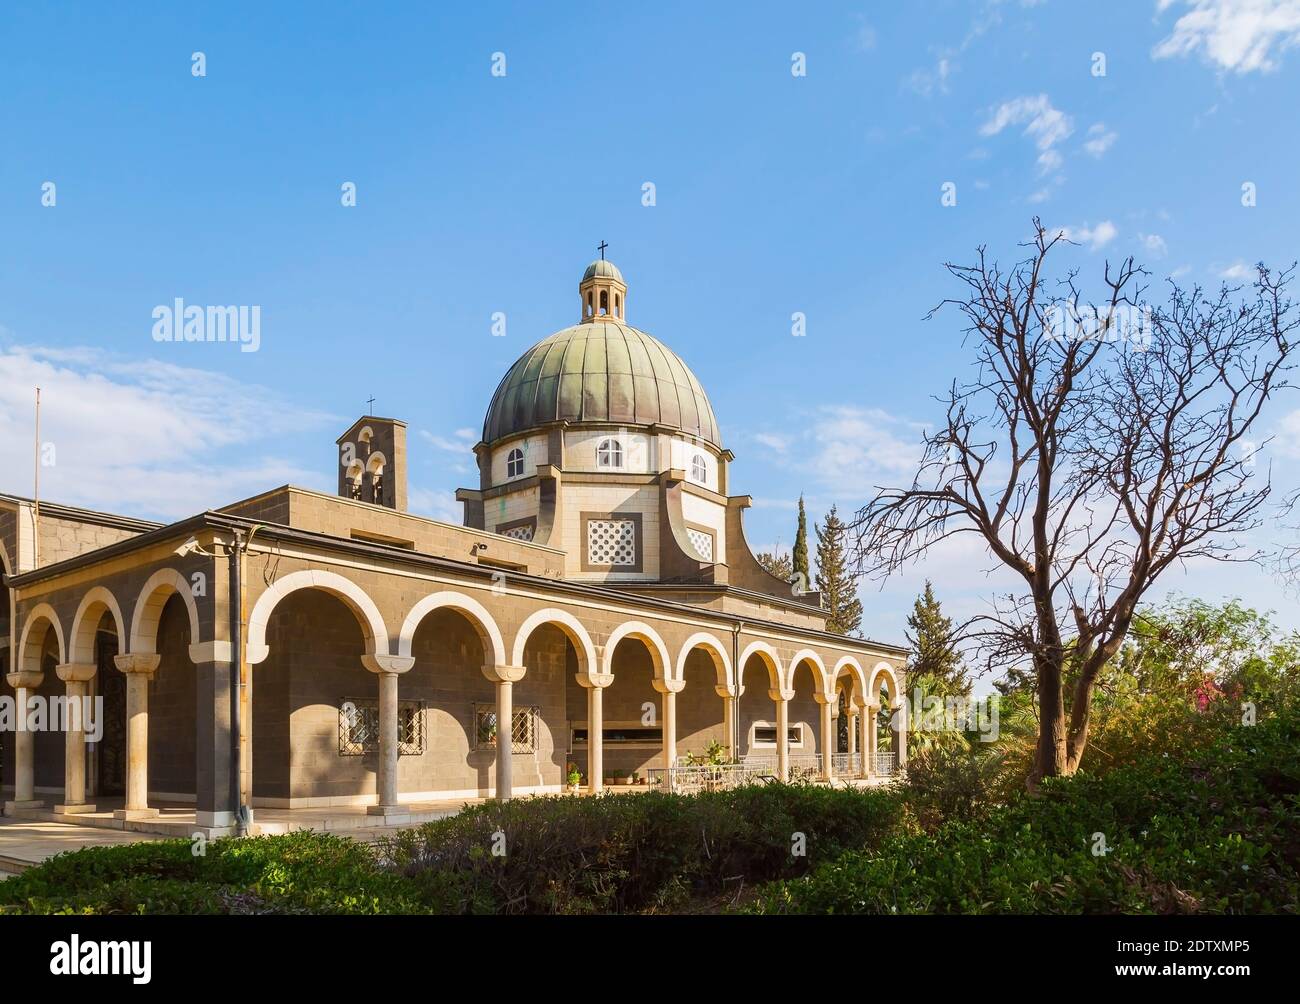 The Church of the Beatitudes on the Mount of Beatitudes, Sea of Galilee region, Israel Stock Photo